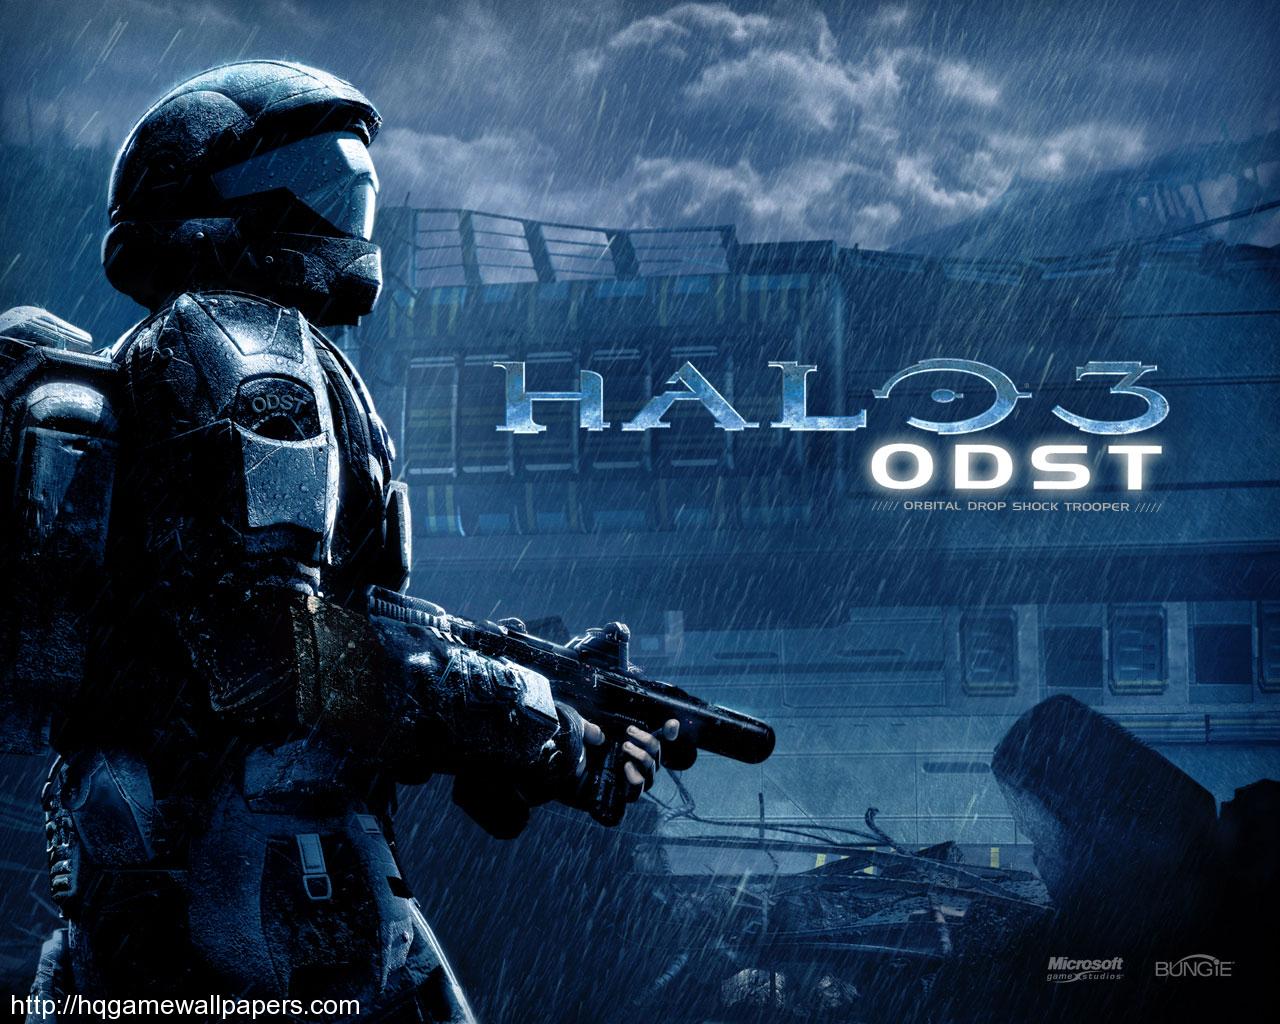 Halo Odst Wallpaper HD In Games Imageci